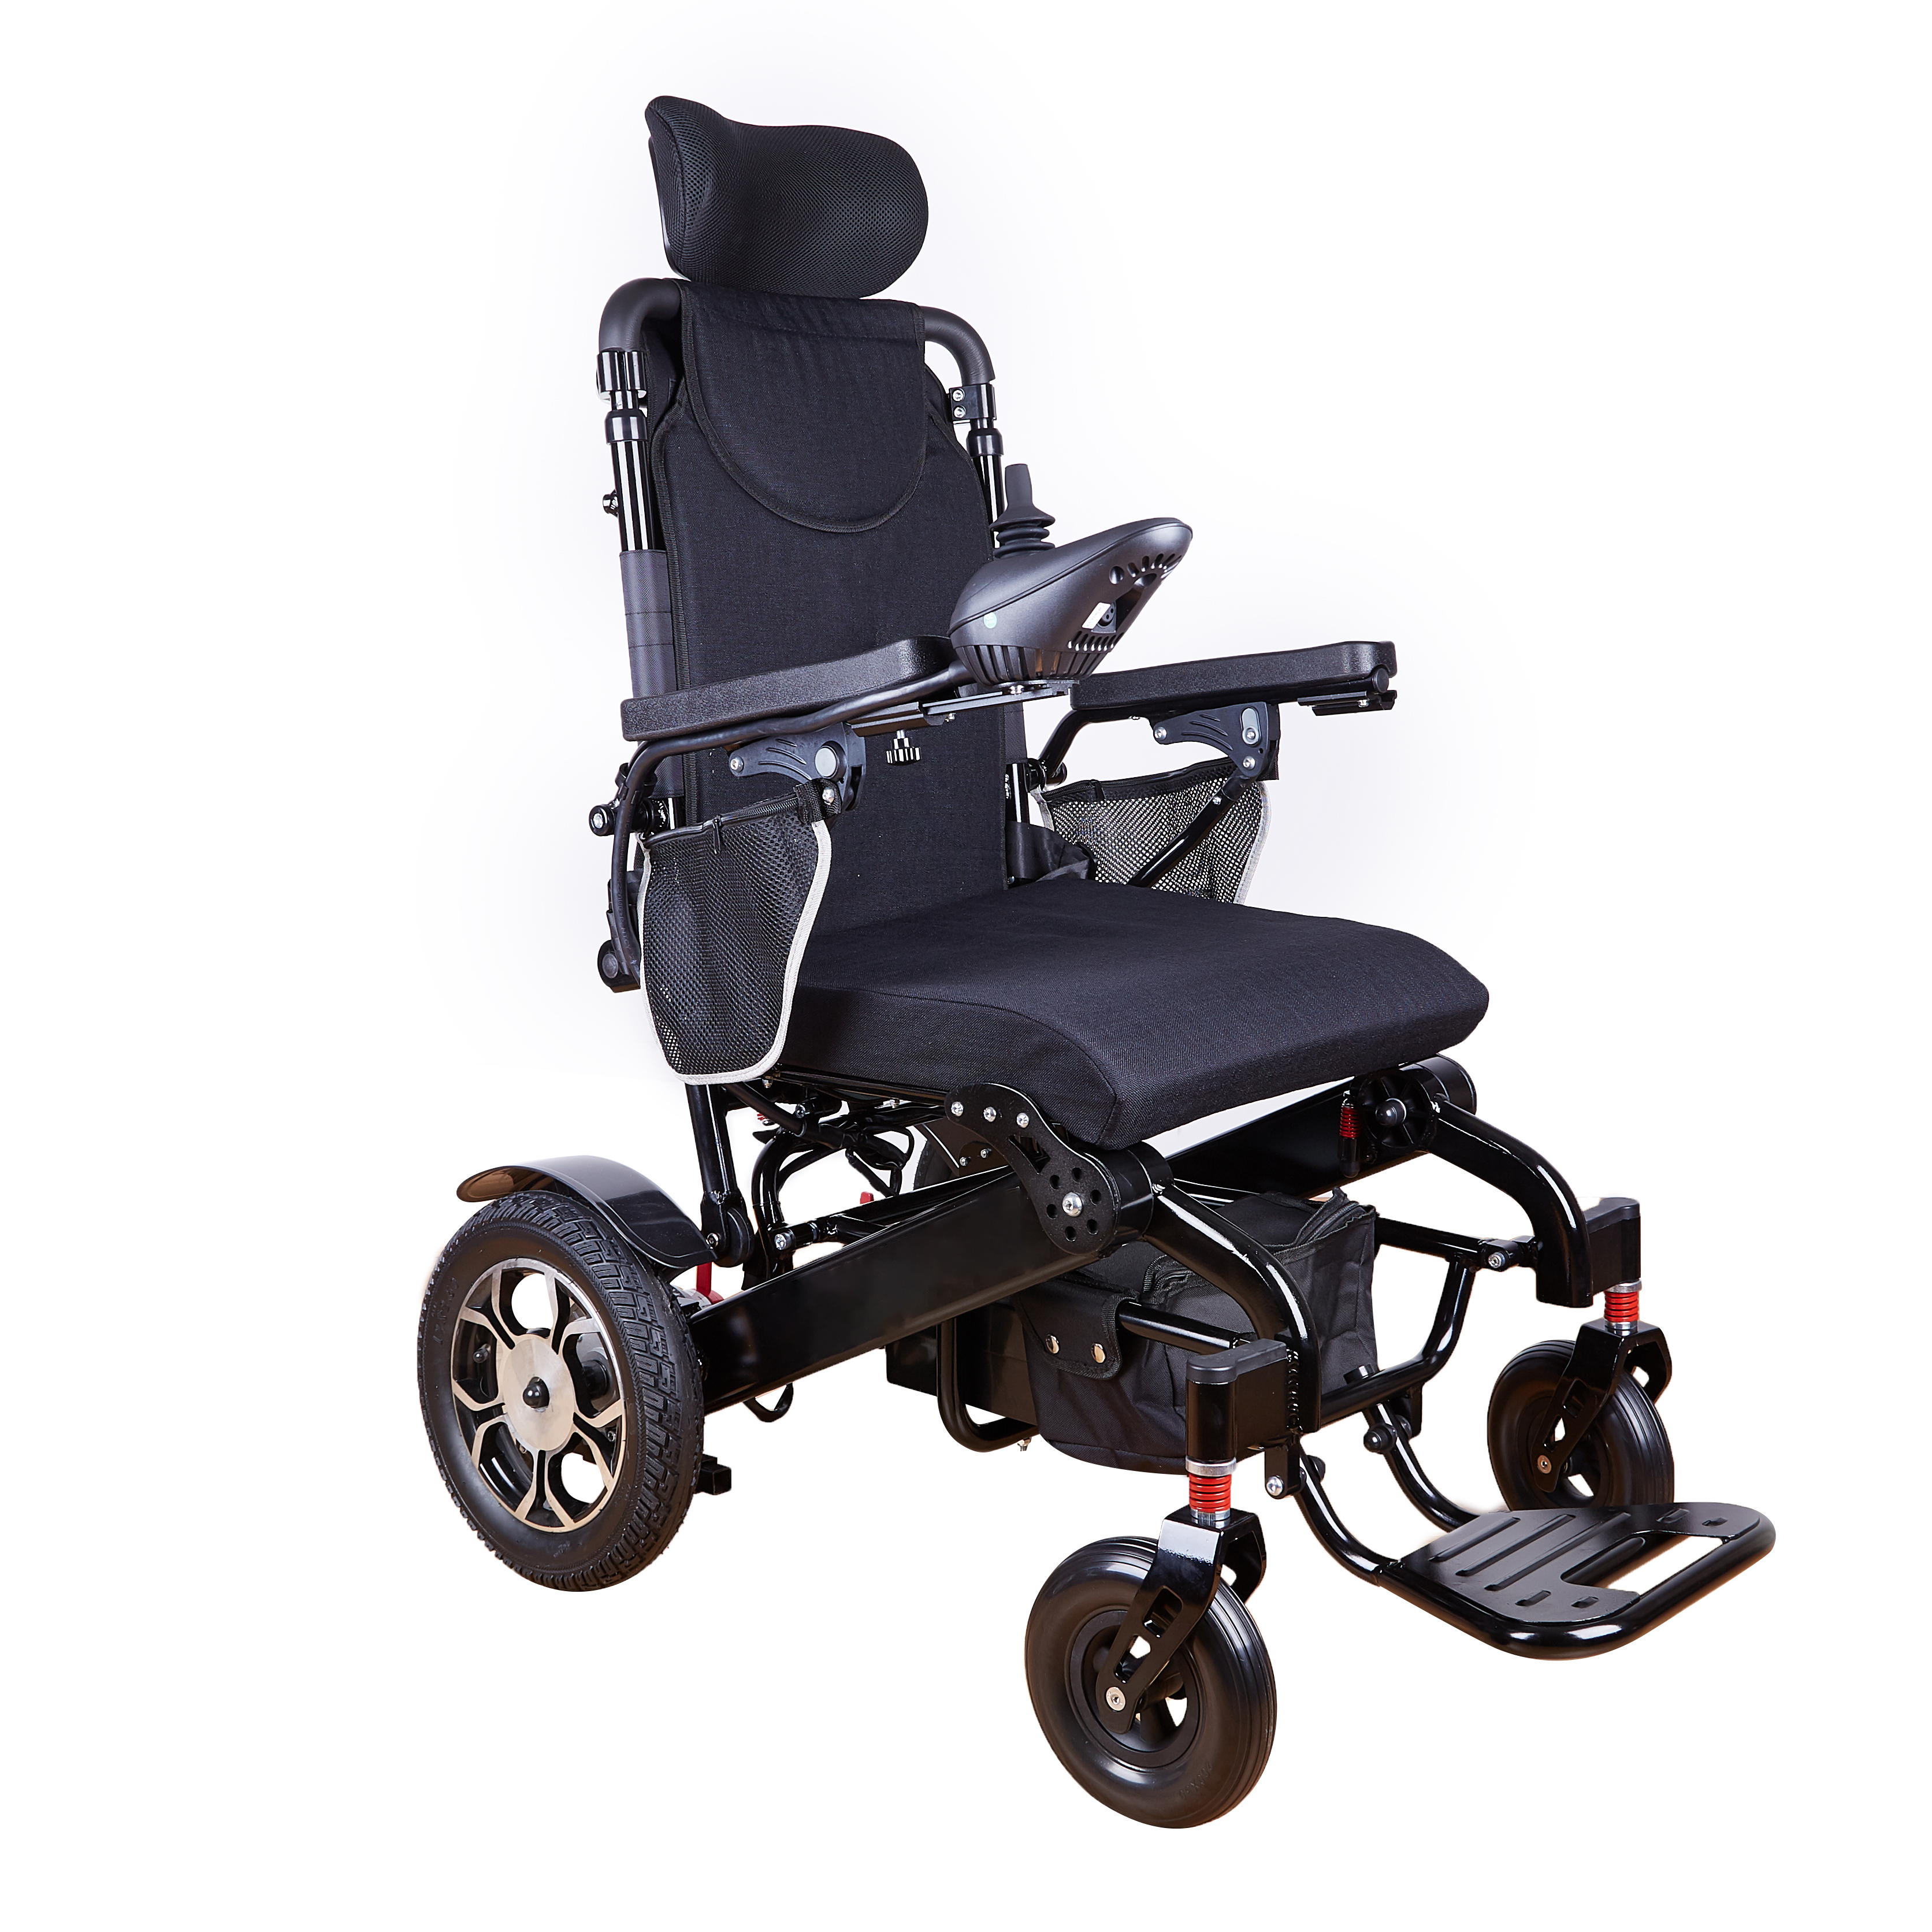 Manual Power Lightweight Folding Wheelchair Manual Wheelchair for Disabled